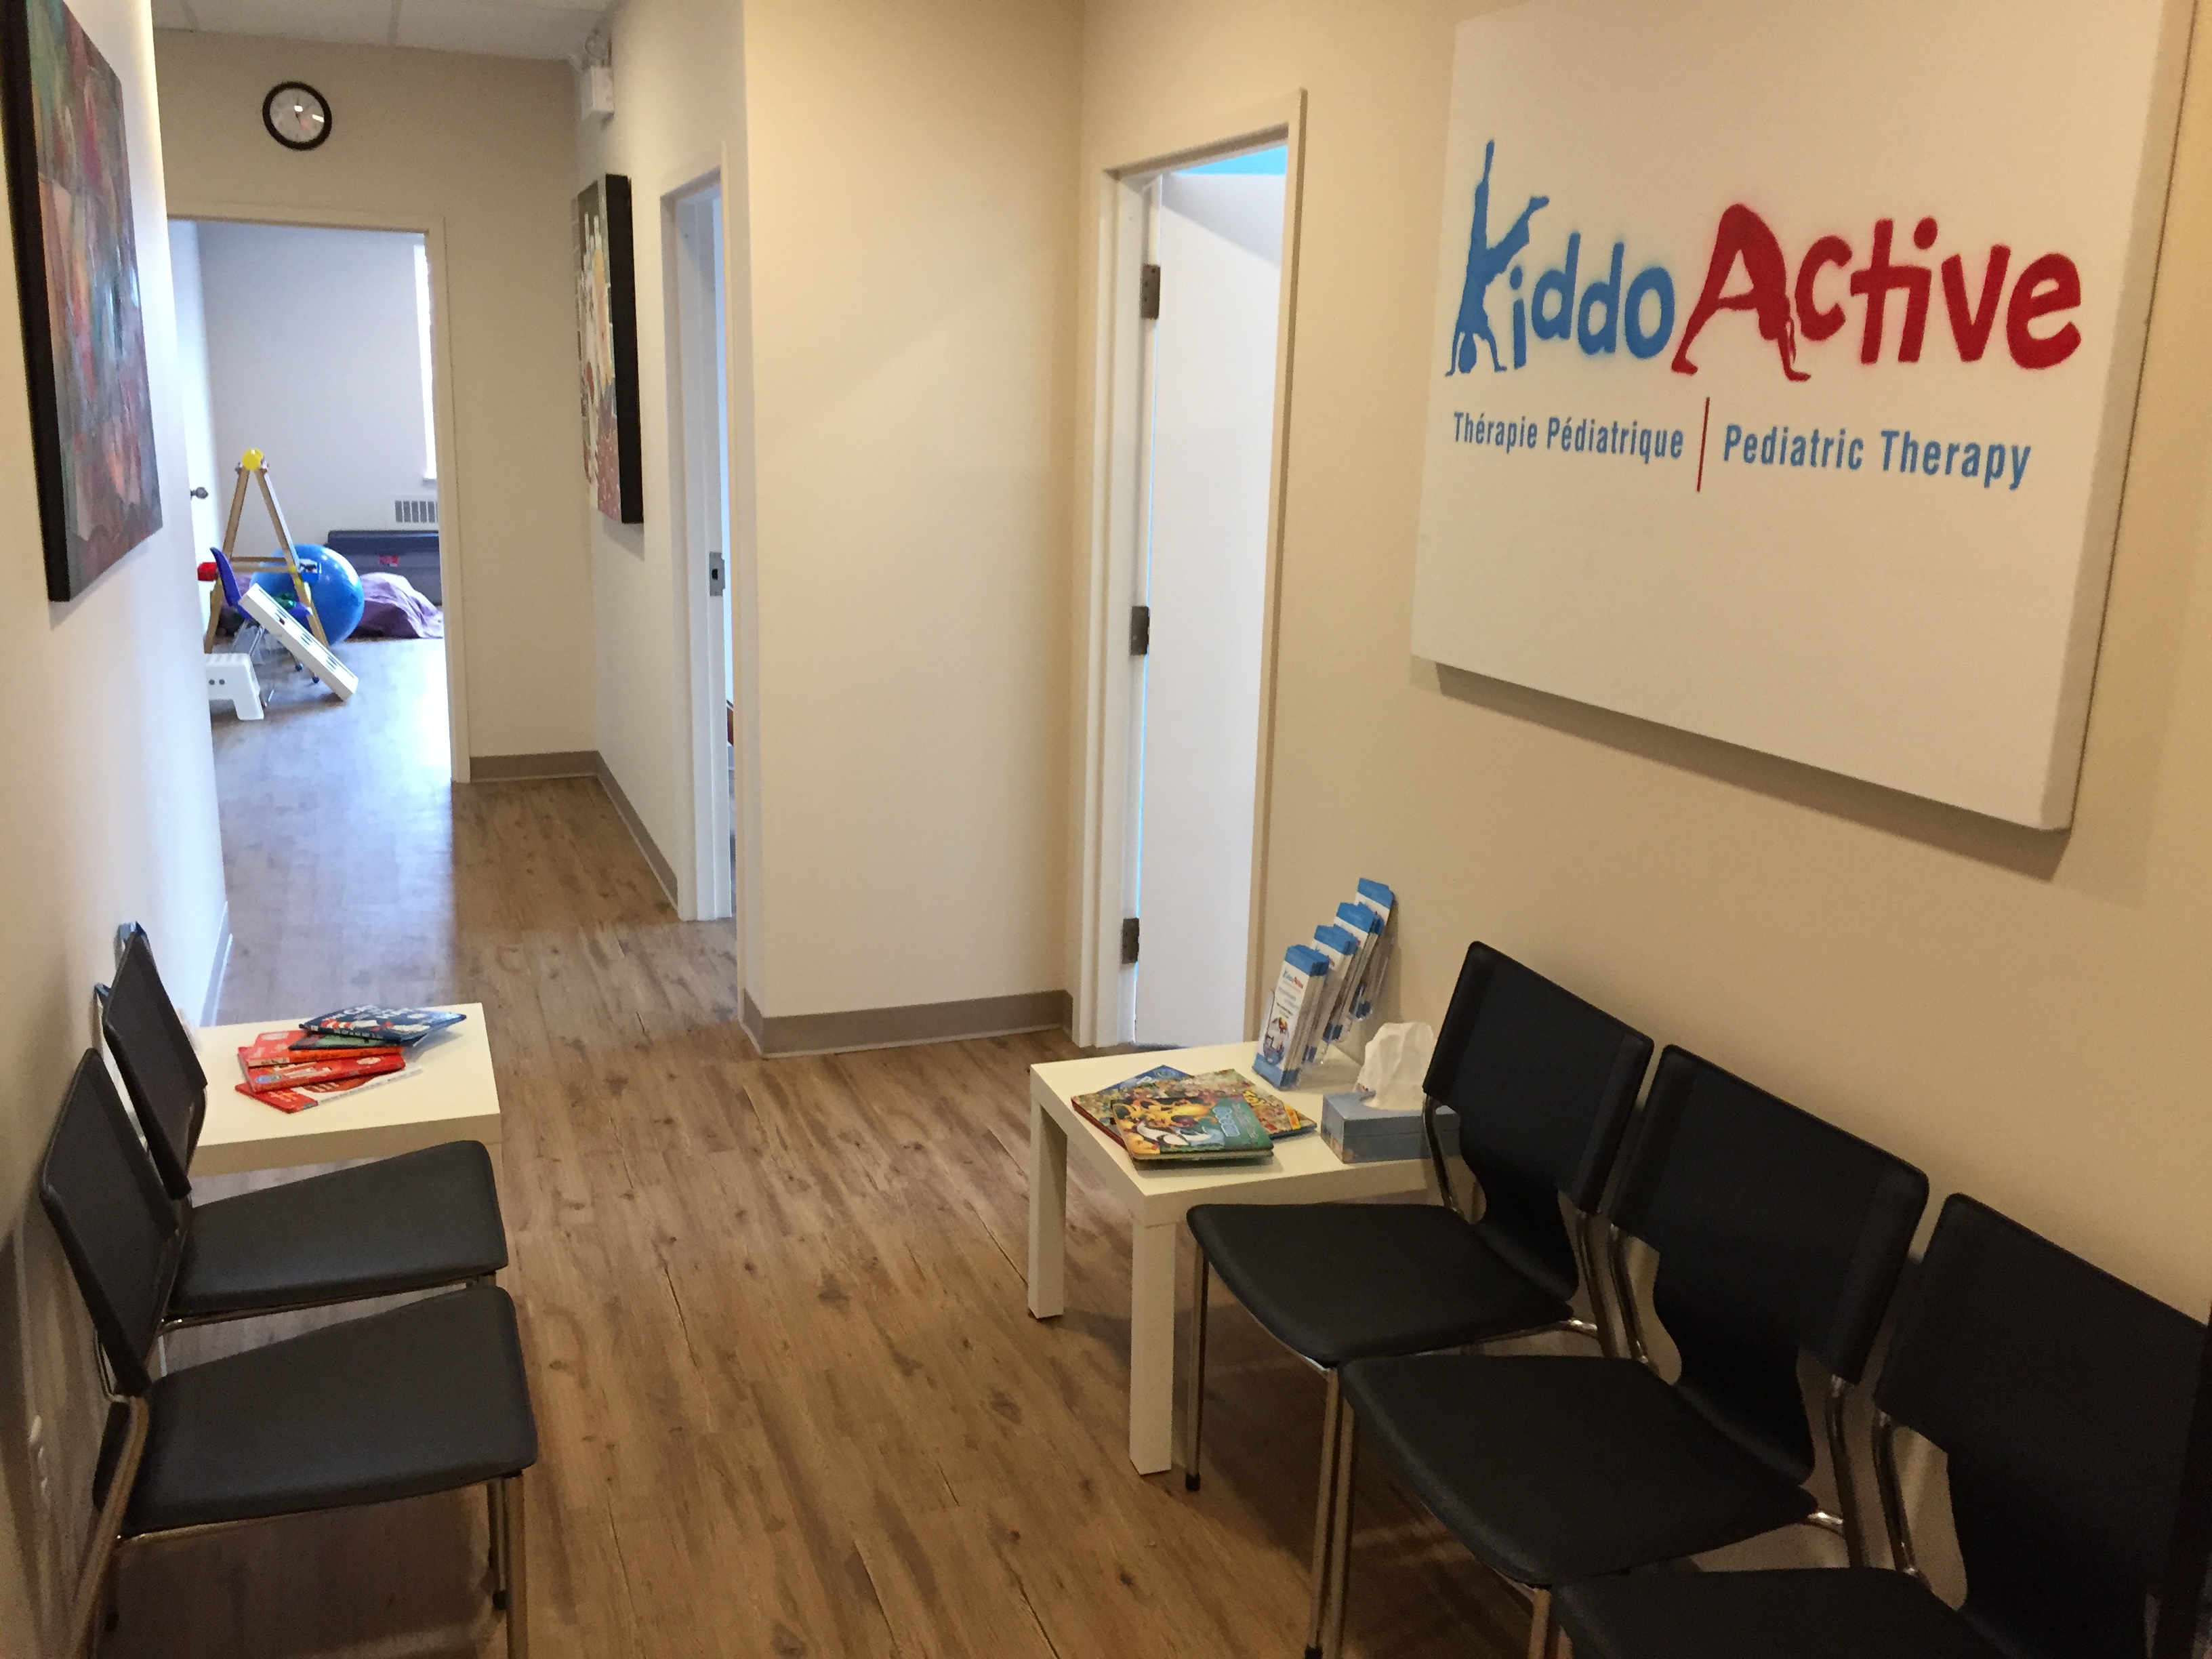 Kiddo Active Therapy Montreal | 205-845 Querbes, Montreal, QC H2V 3J1 | +1 514-428-0123